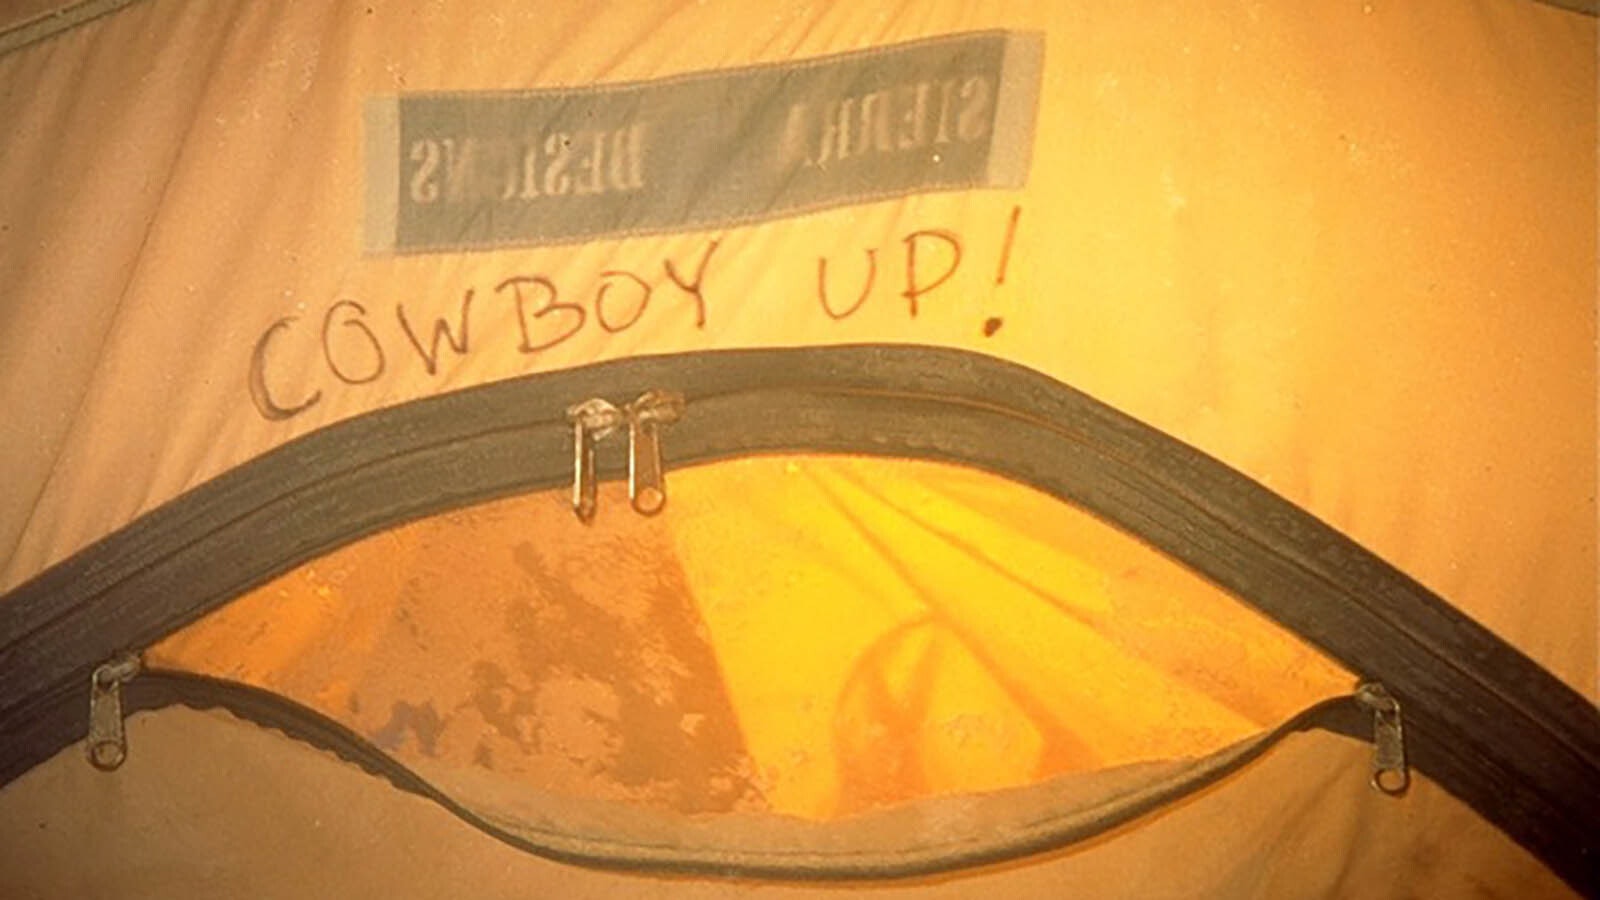 The motto of the climbers on their expedition is familiar to all Wyomingites: Cowboy Up!